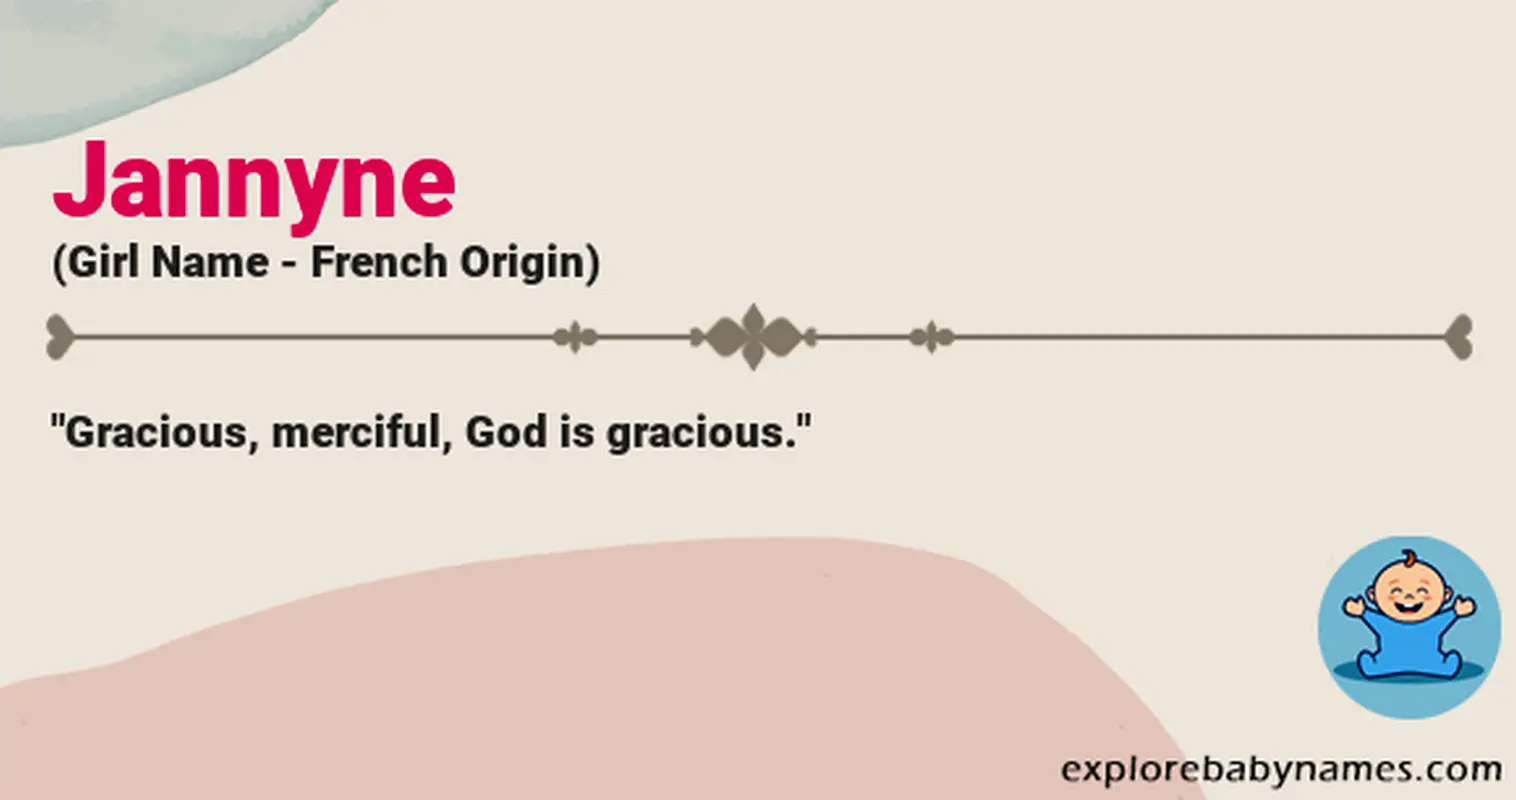 Meaning of Jannyne